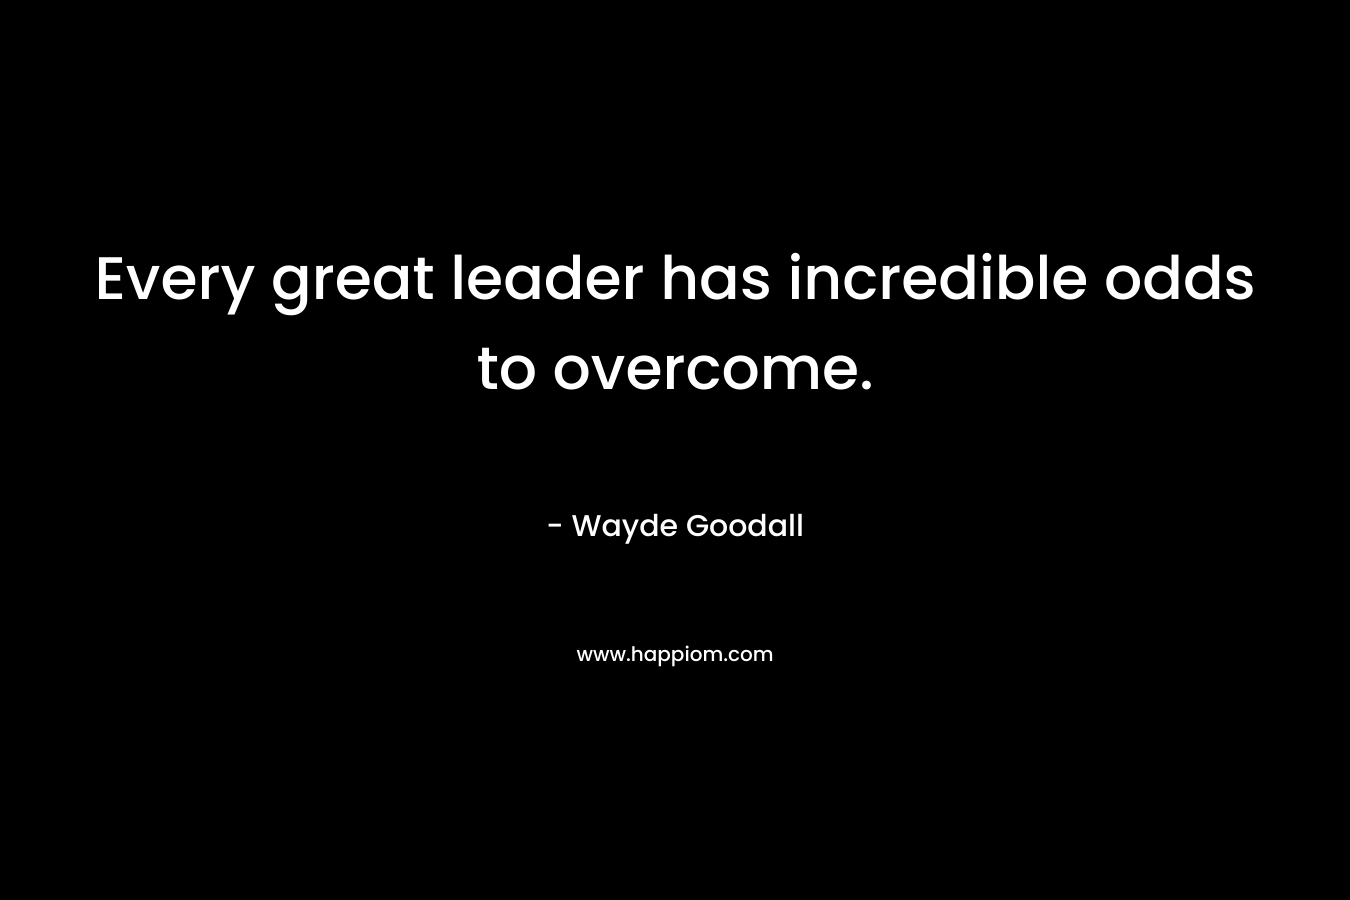 Every great leader has incredible odds to overcome. – Wayde Goodall